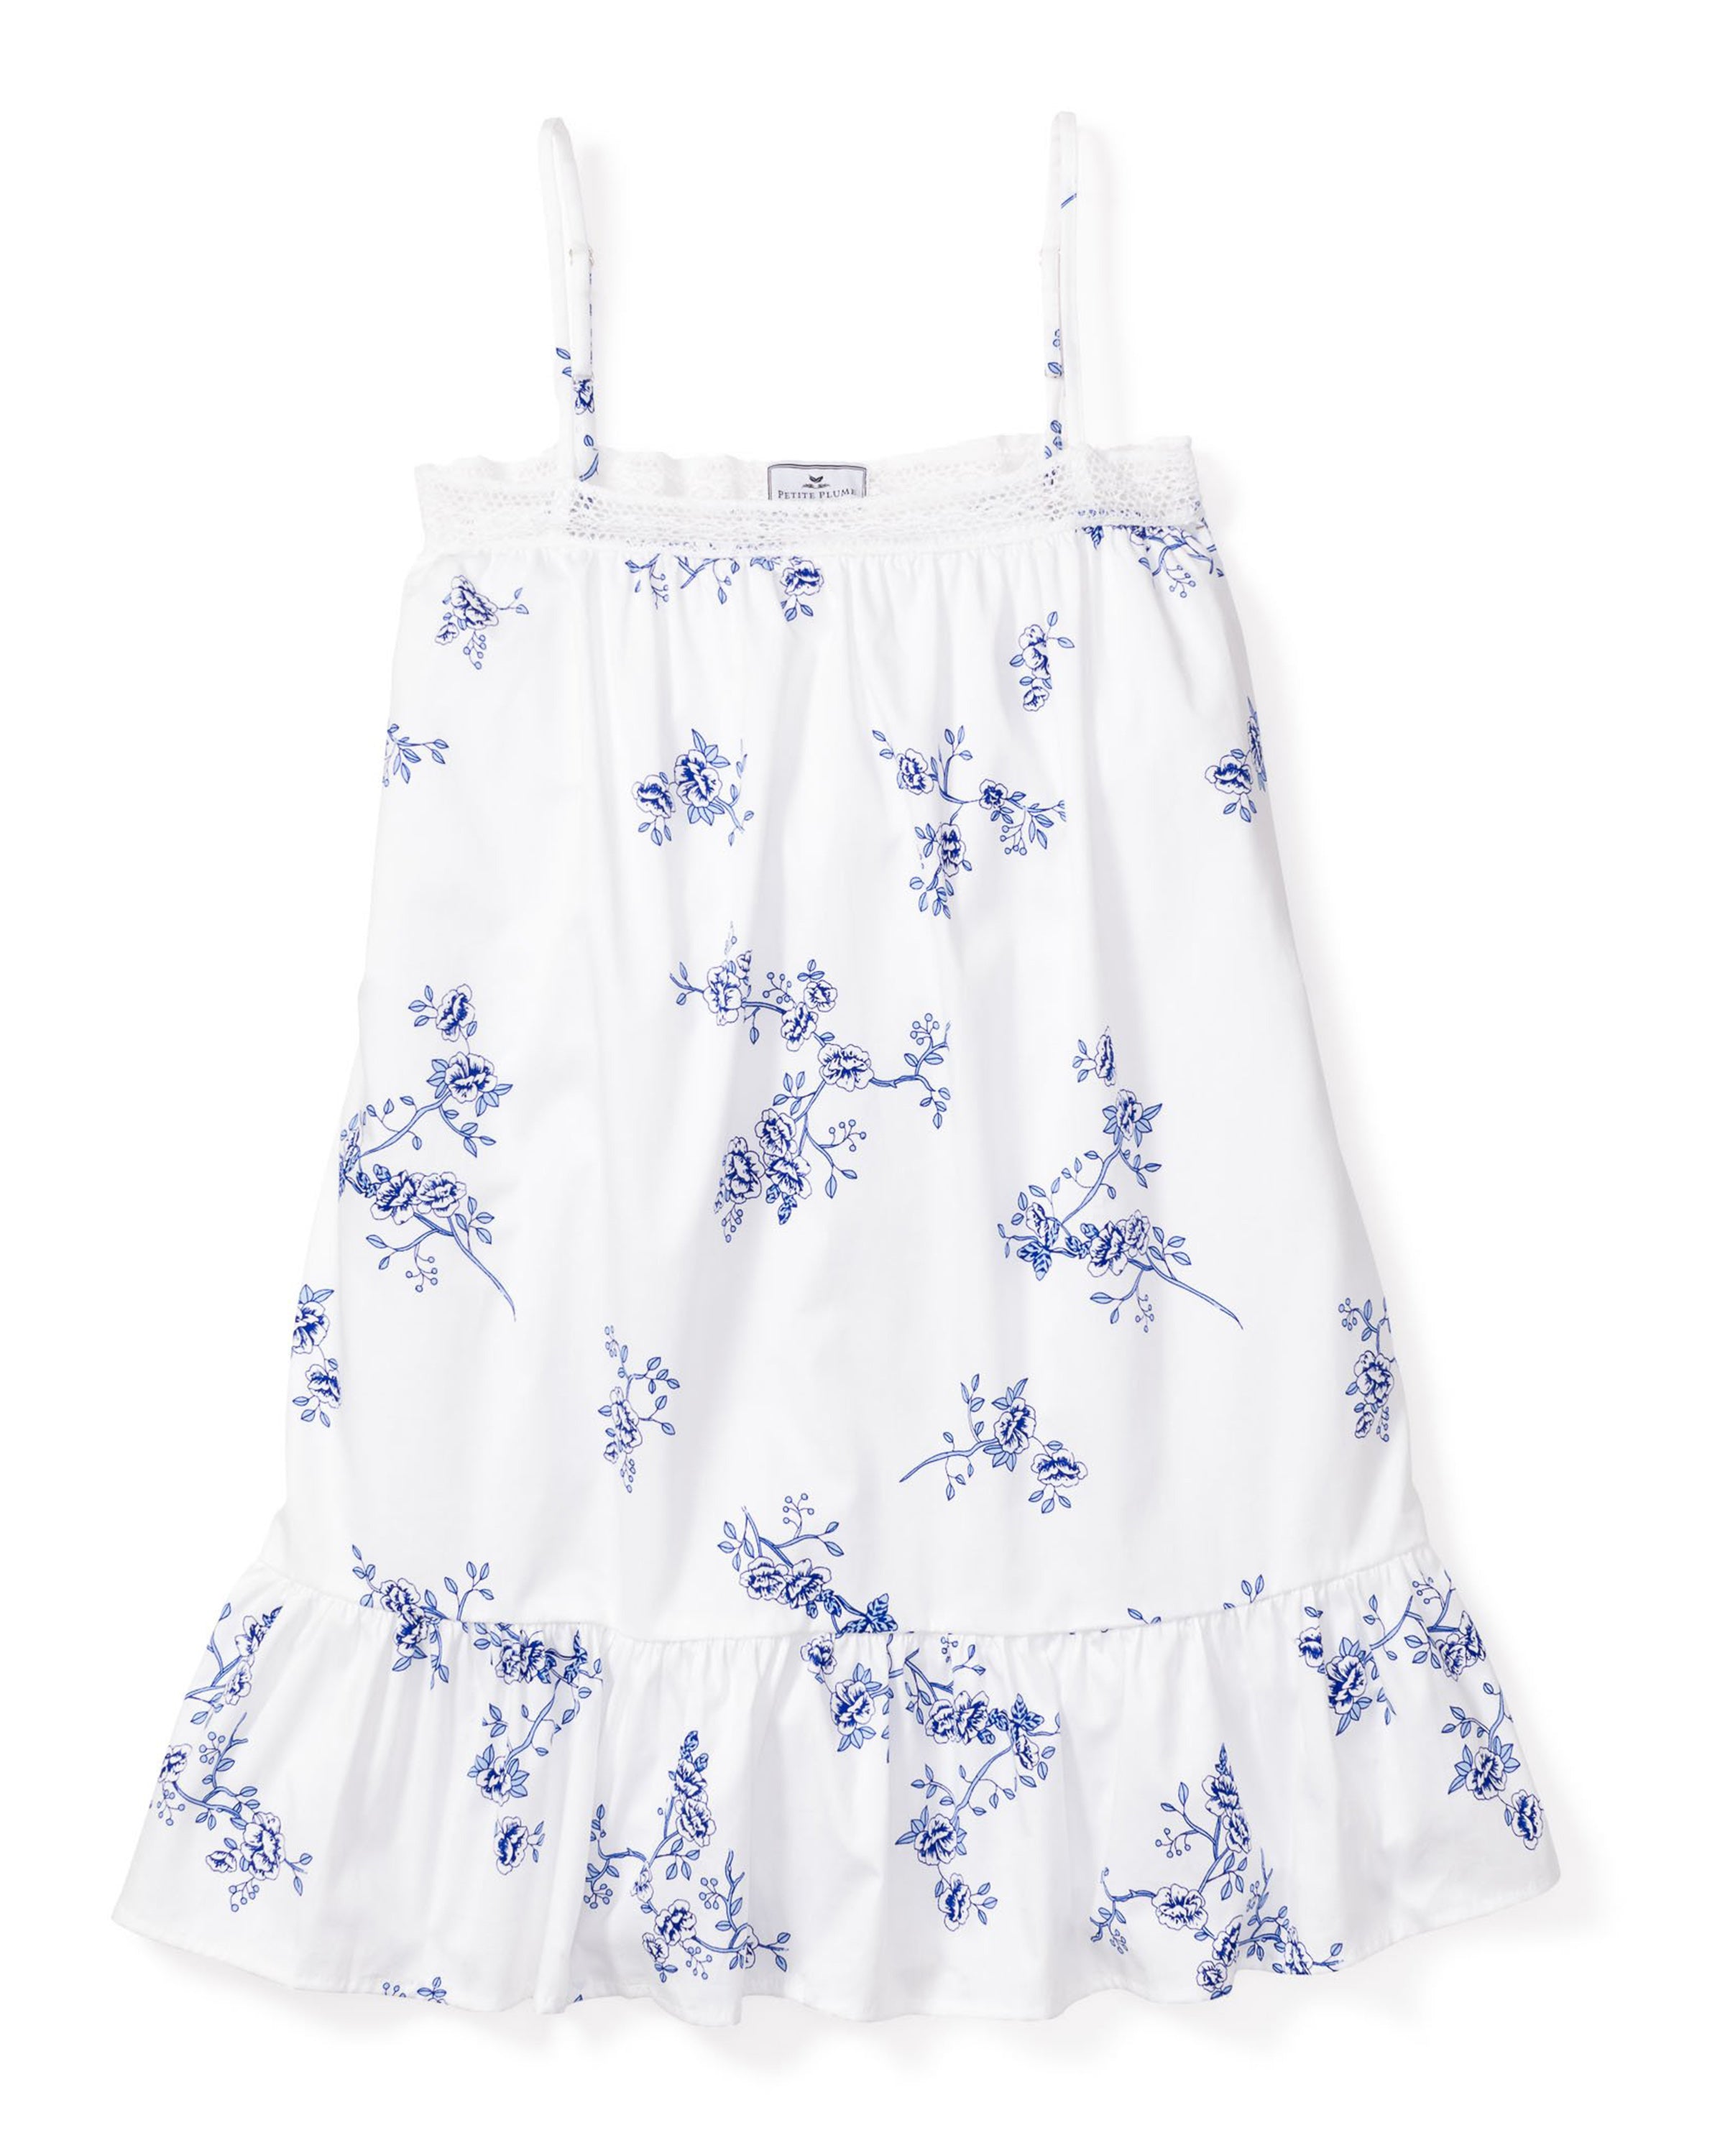 Girl's Twill Lily Nightgown in Indigo Floral